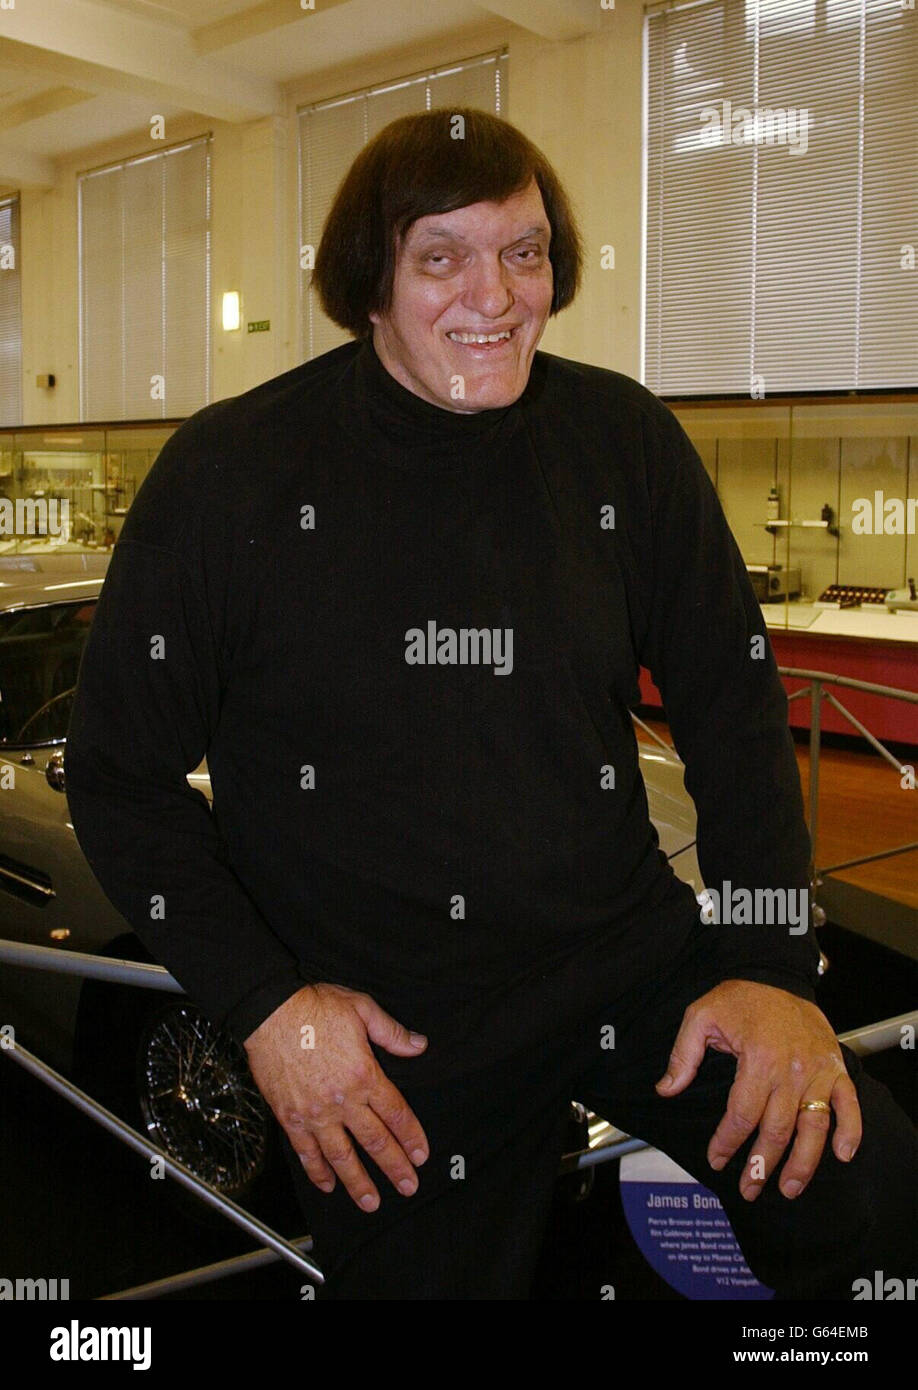 Richard Kiel, who played 'Jaws' in James Bond movies, at the Science Museum, London. The exhibition is a retrospective of Bond memorabilia, coinciding with the launch of the new movie. Stock Photo